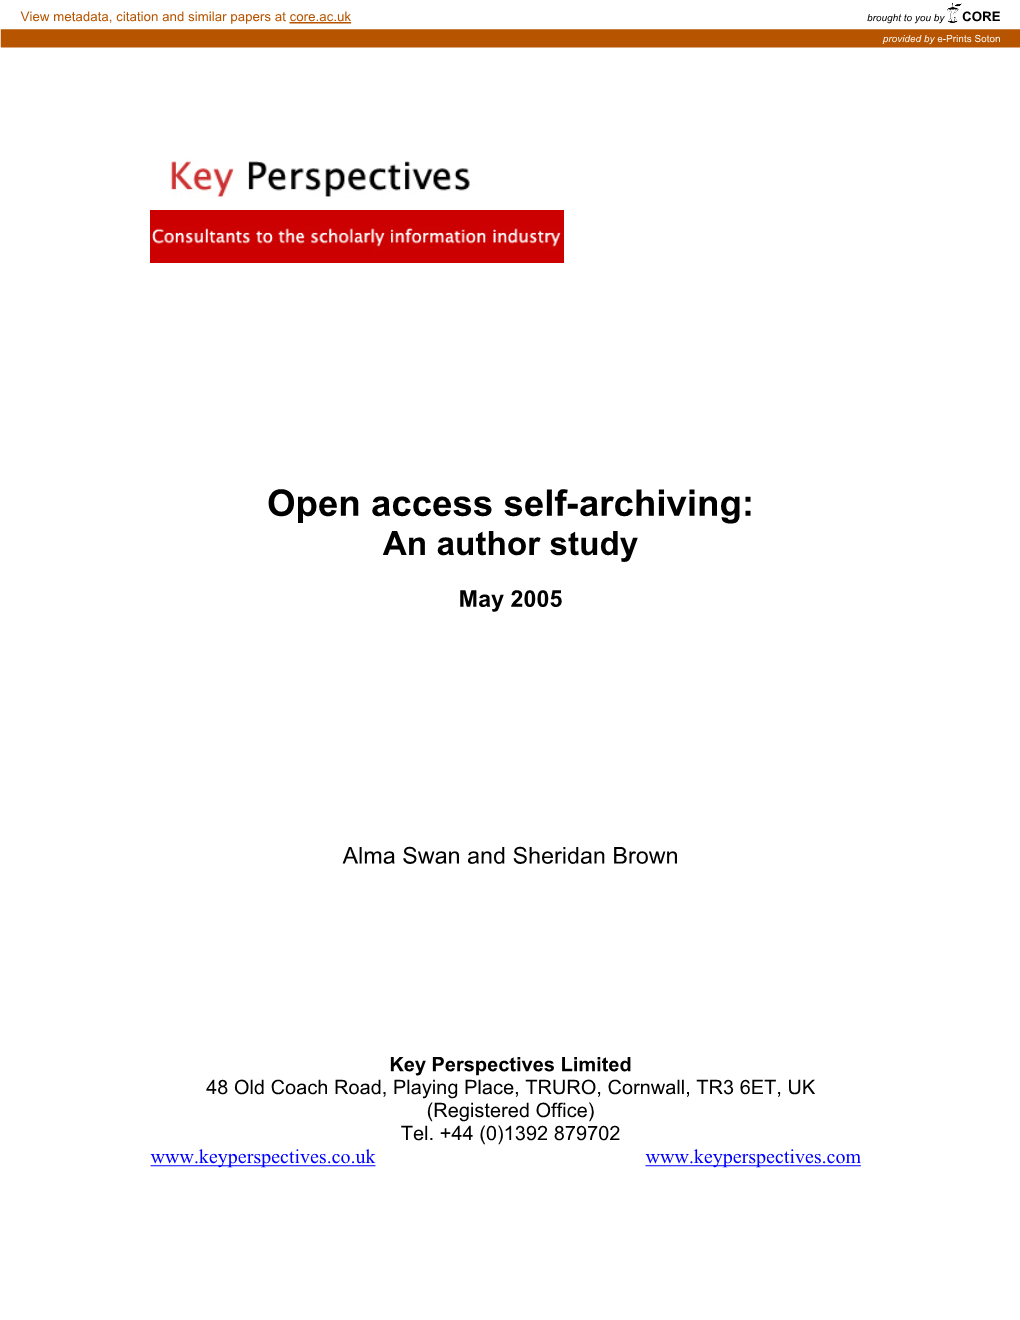 Open Access Self-Archiving: an Author Study